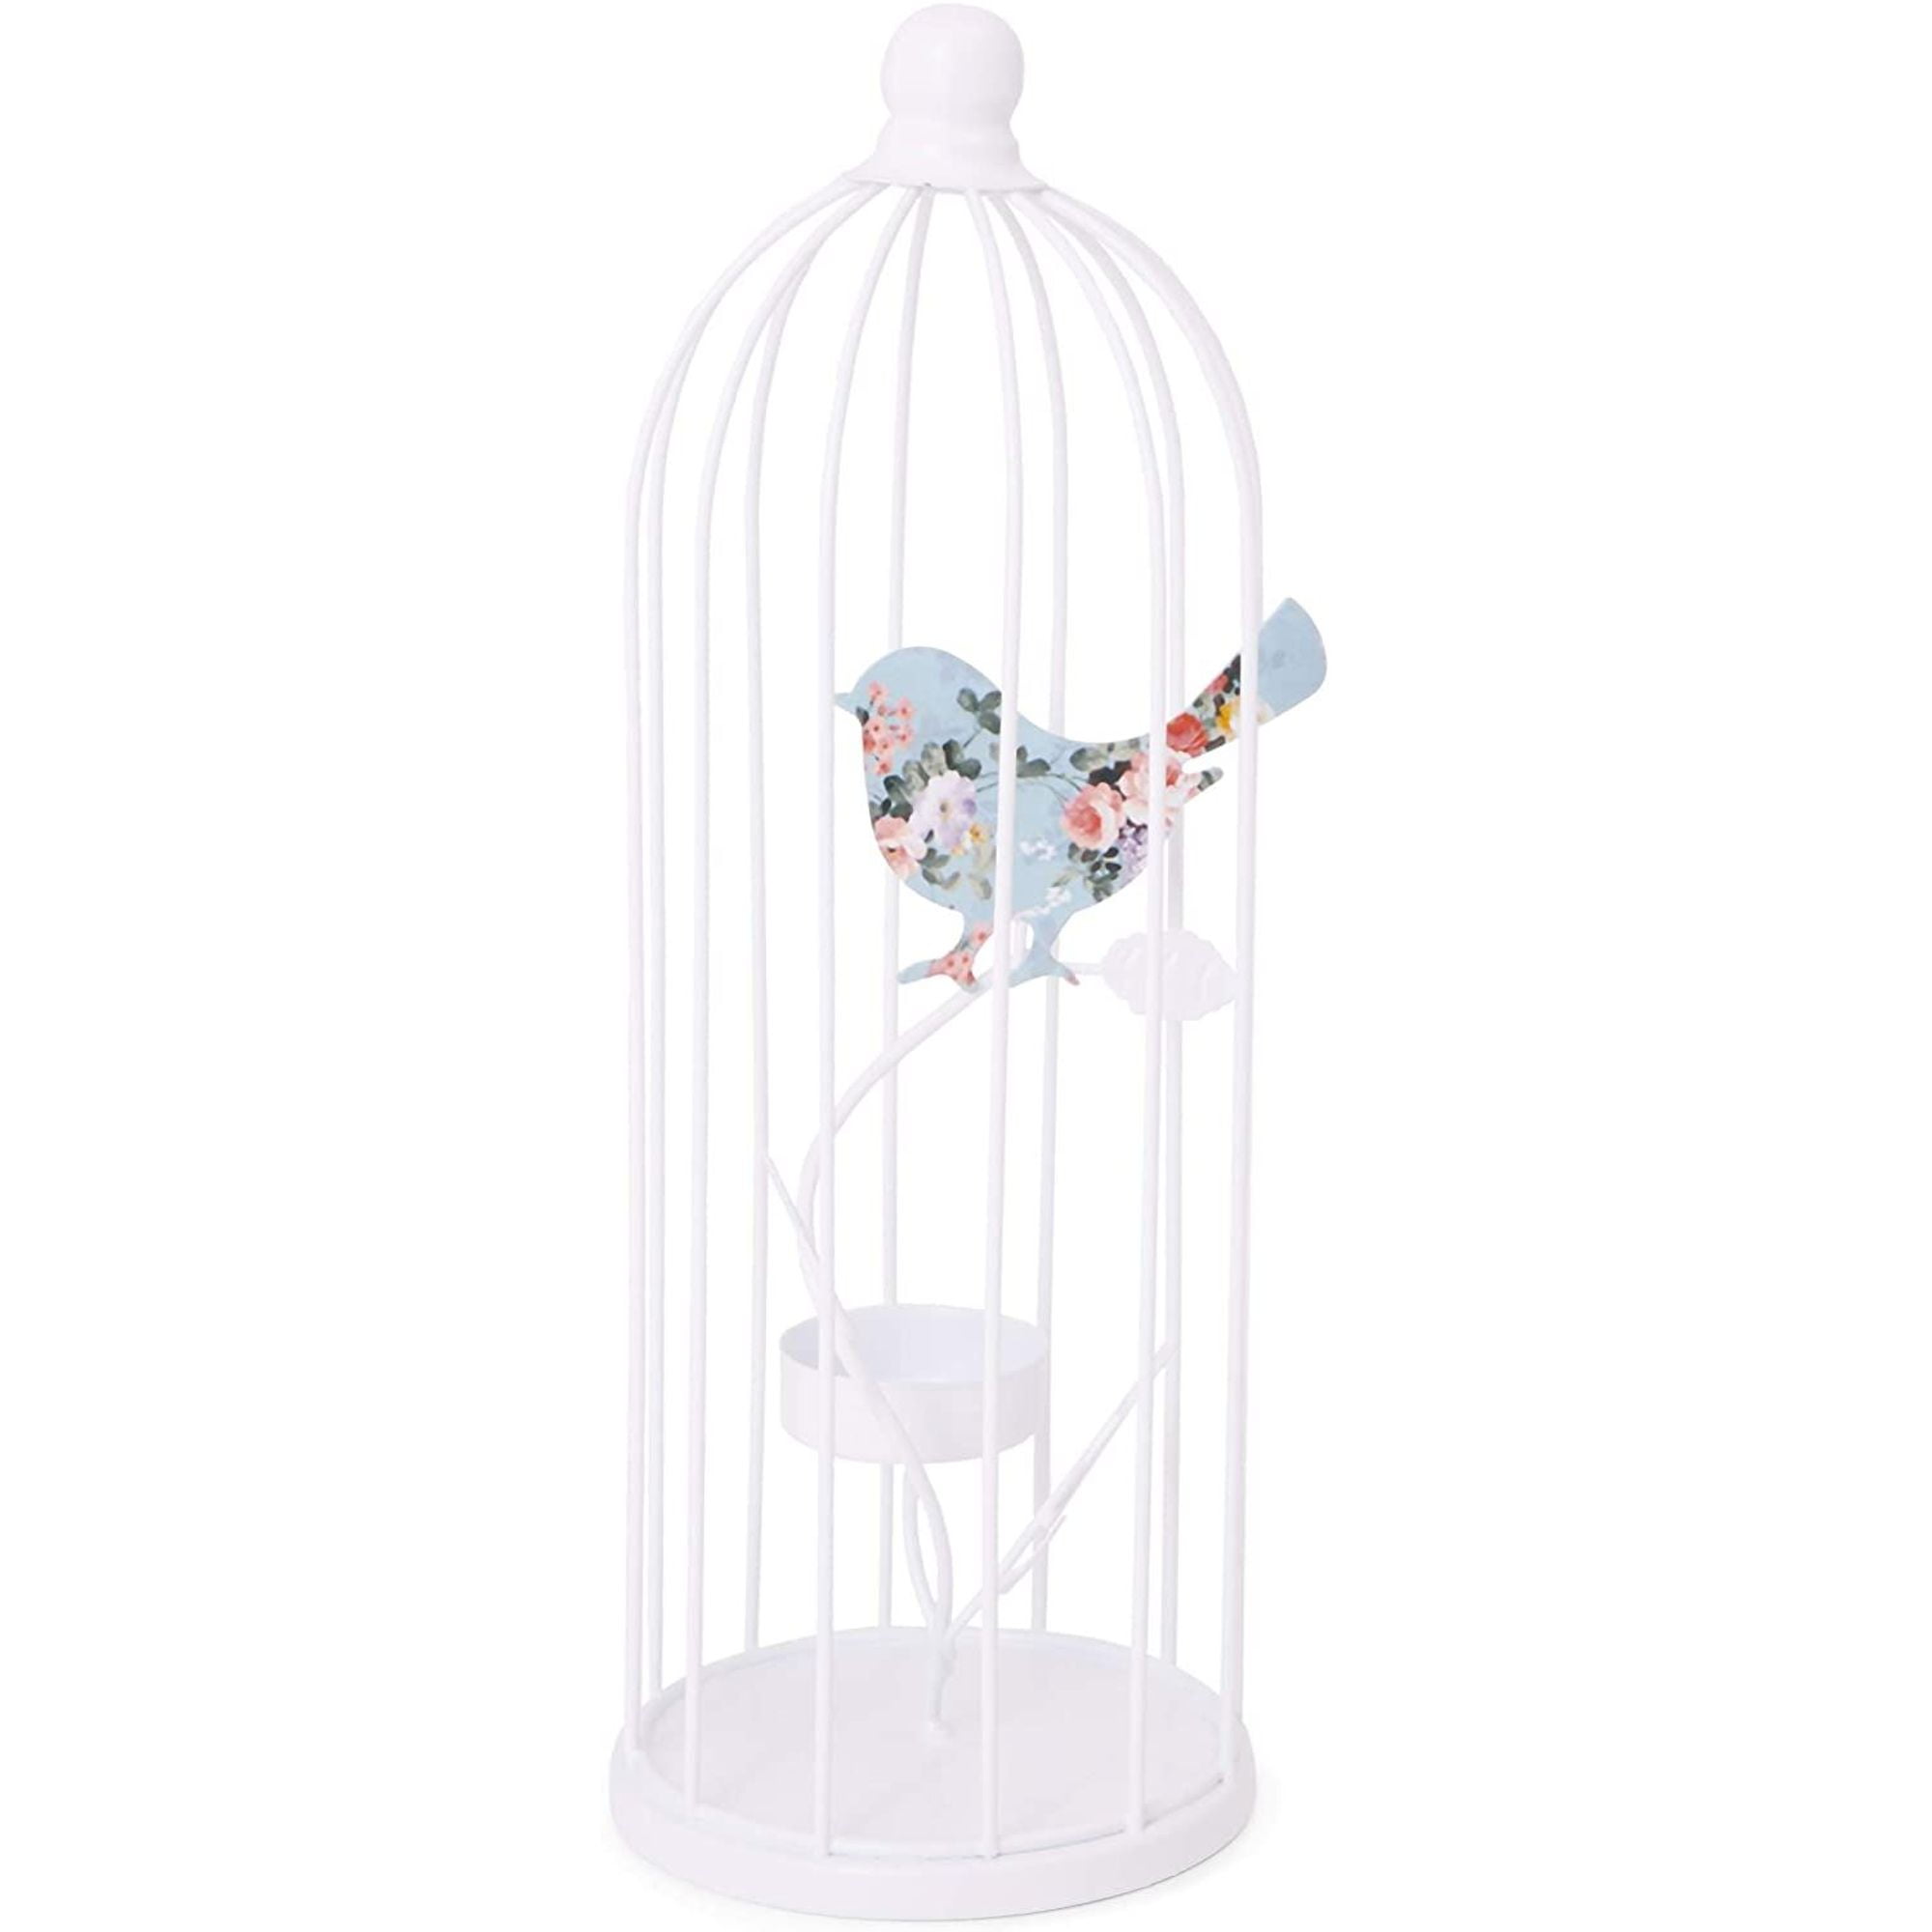 Shabby Chic White Distressed Bird Tealight Candle Holder Light Stand New 